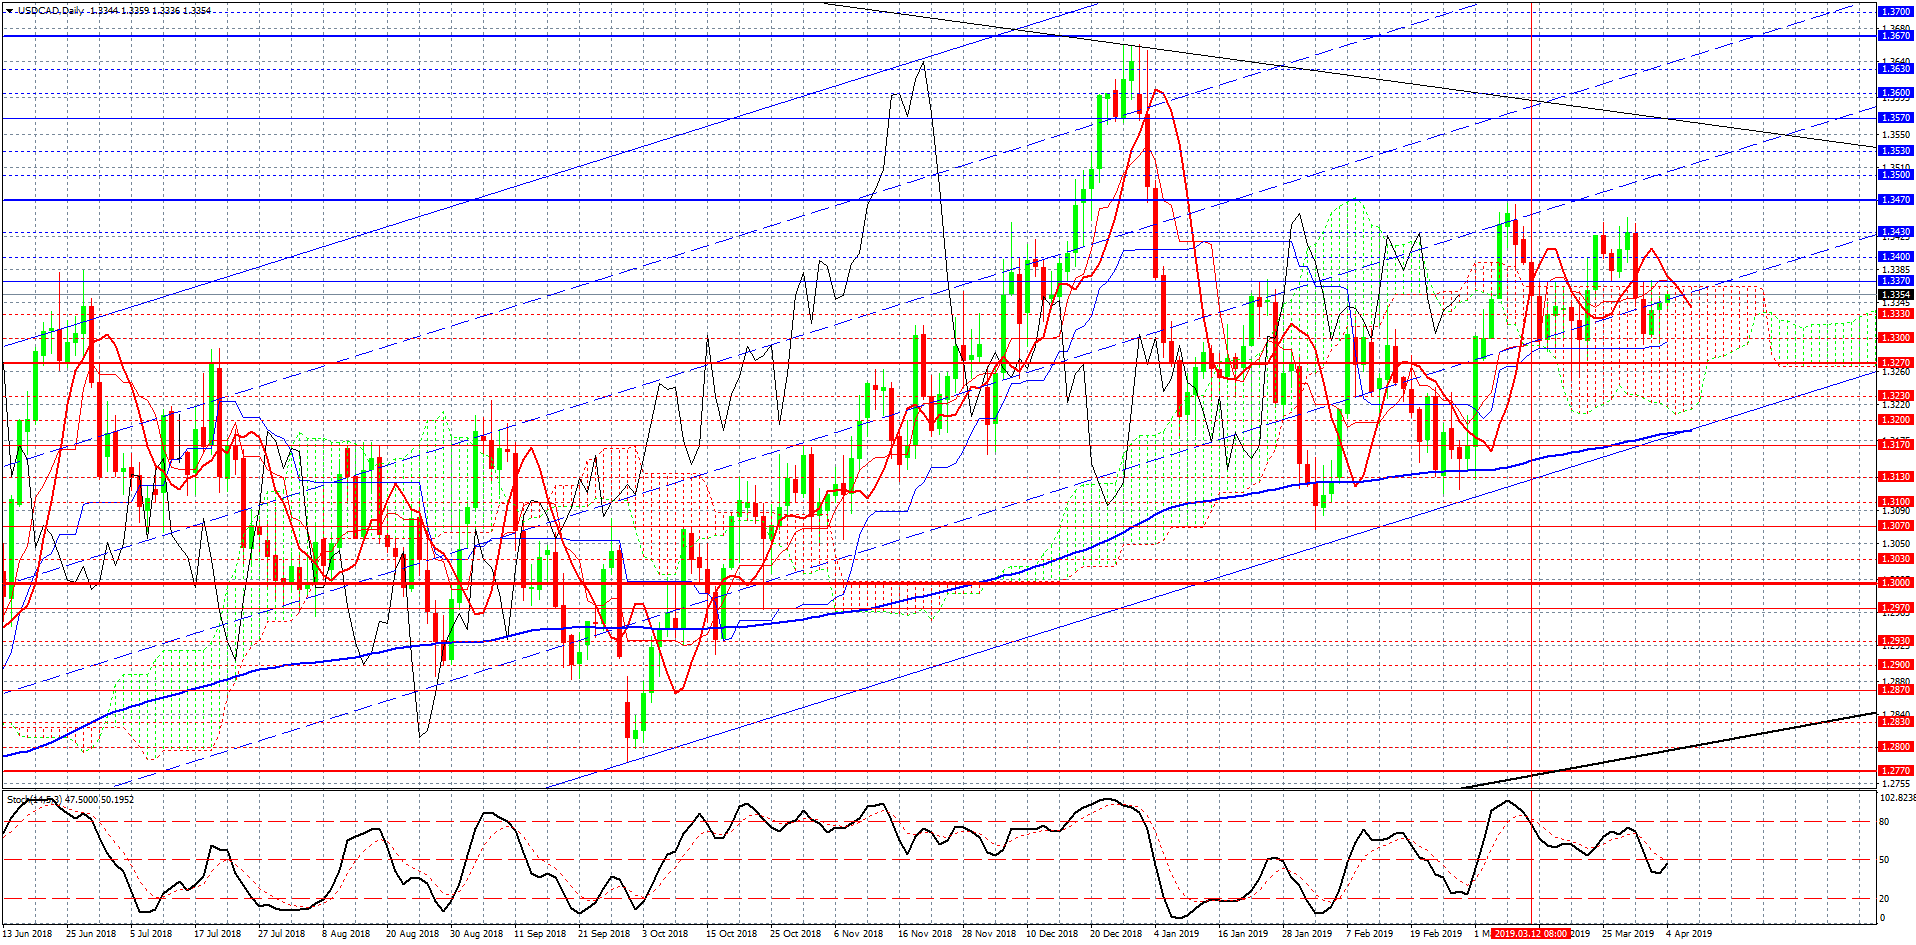 2USDCAD-Daily